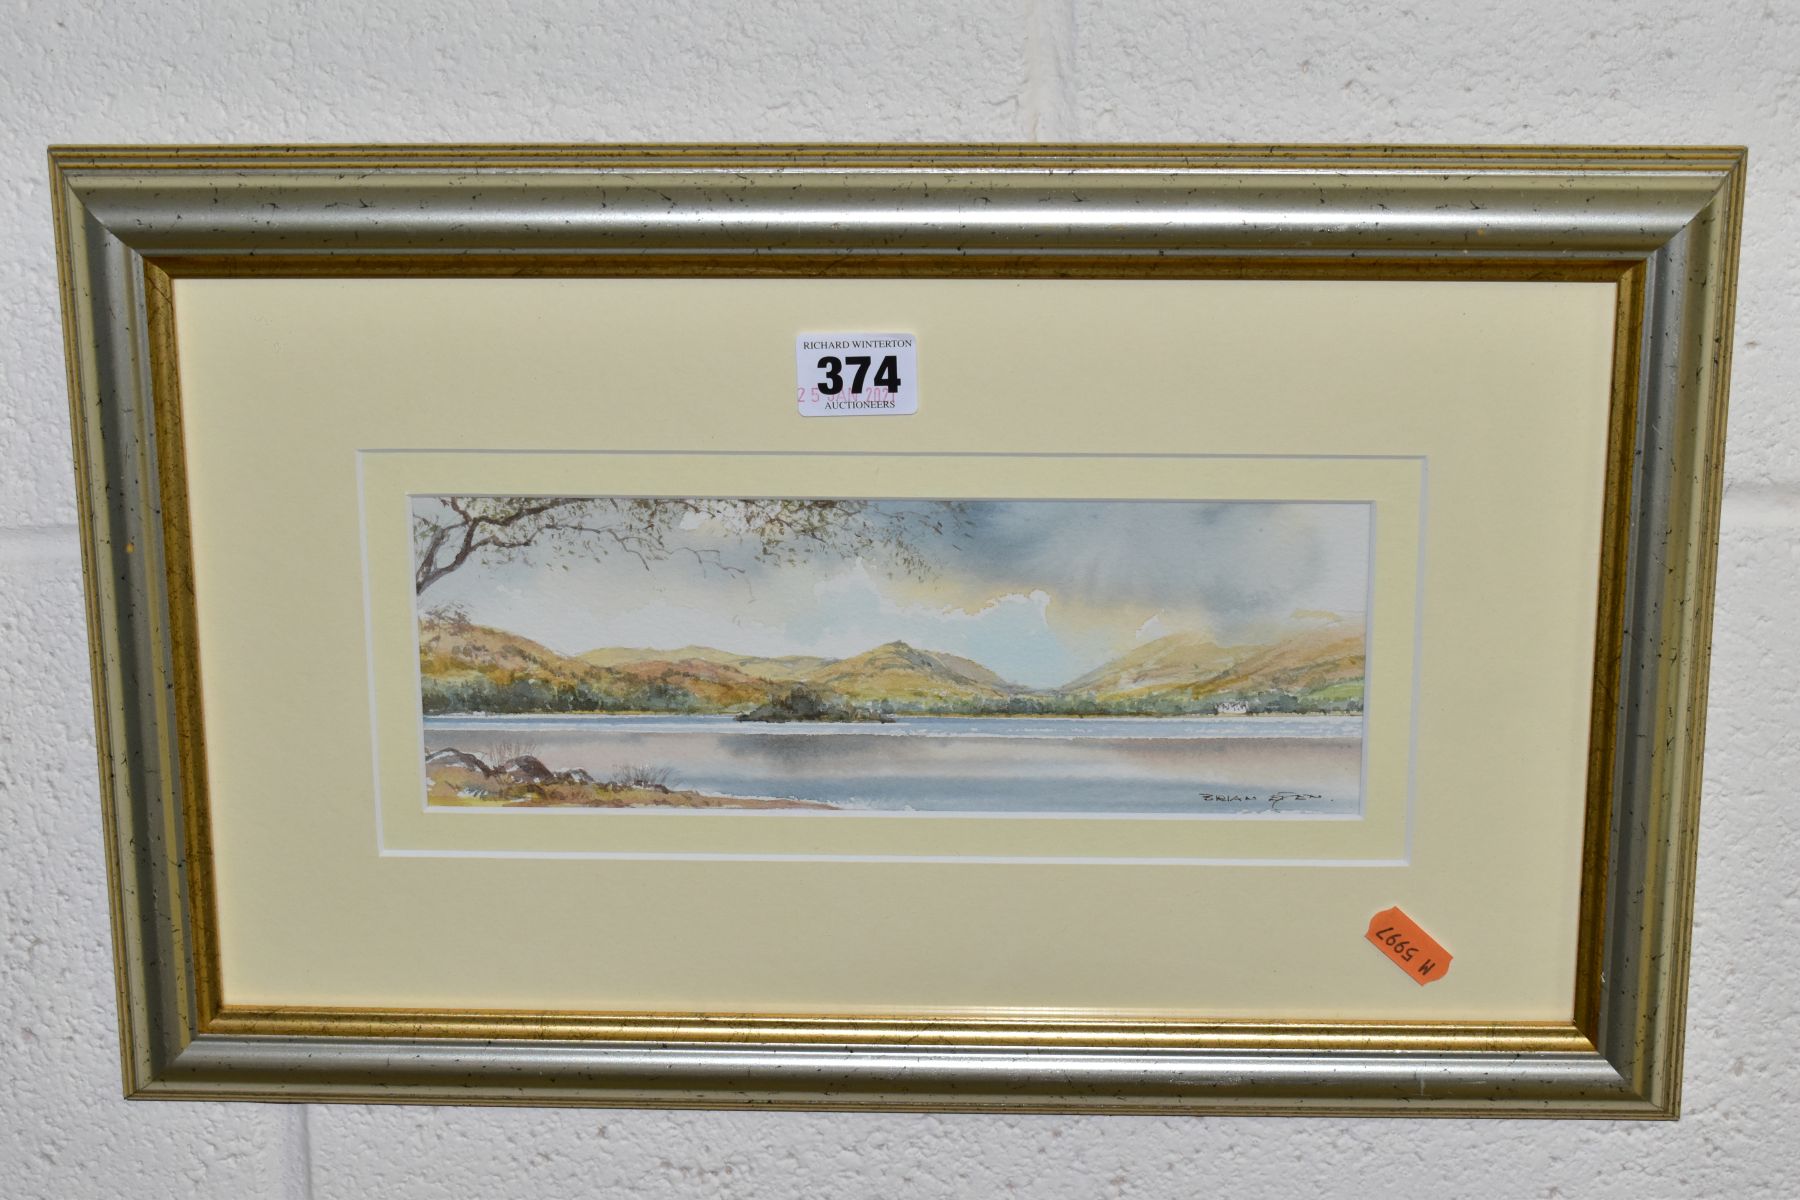 BRIAN EDEN (BRITISH CONTEMPORARY), a pair of Lake District landscape watercolours, signed bottom